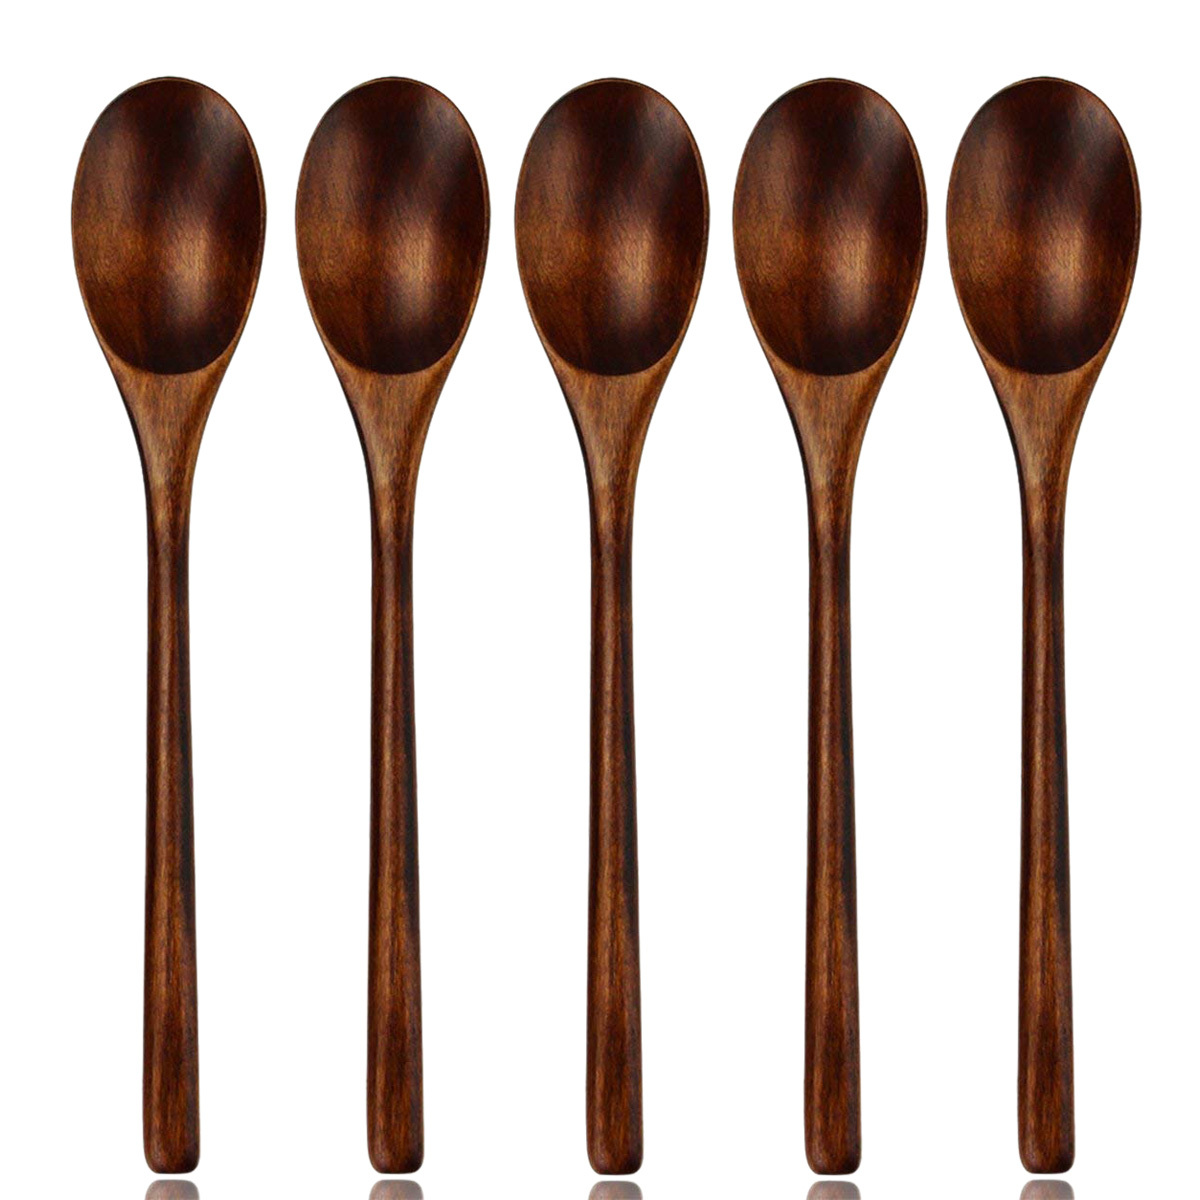 Spoons Wooden Soup Spoon 5 Pieces Eco Friendly Tableware Natural Ellipse Wooden Ladle Spoon Set for for Eating Mixing Stirring